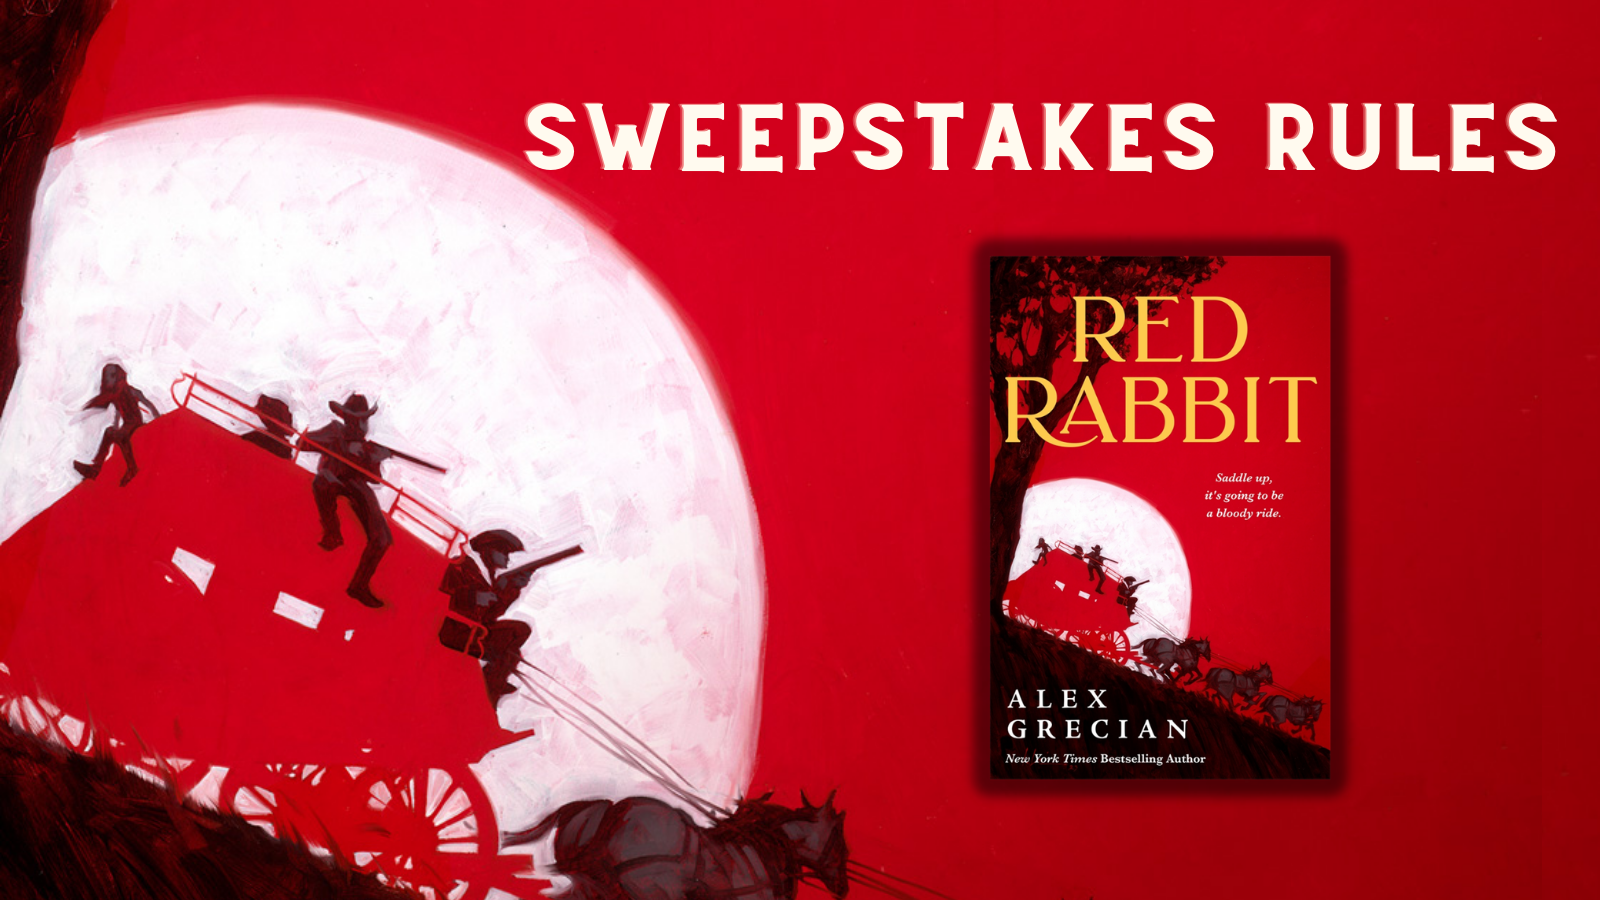 Red Rabbit Sweepstakes Rules - 30